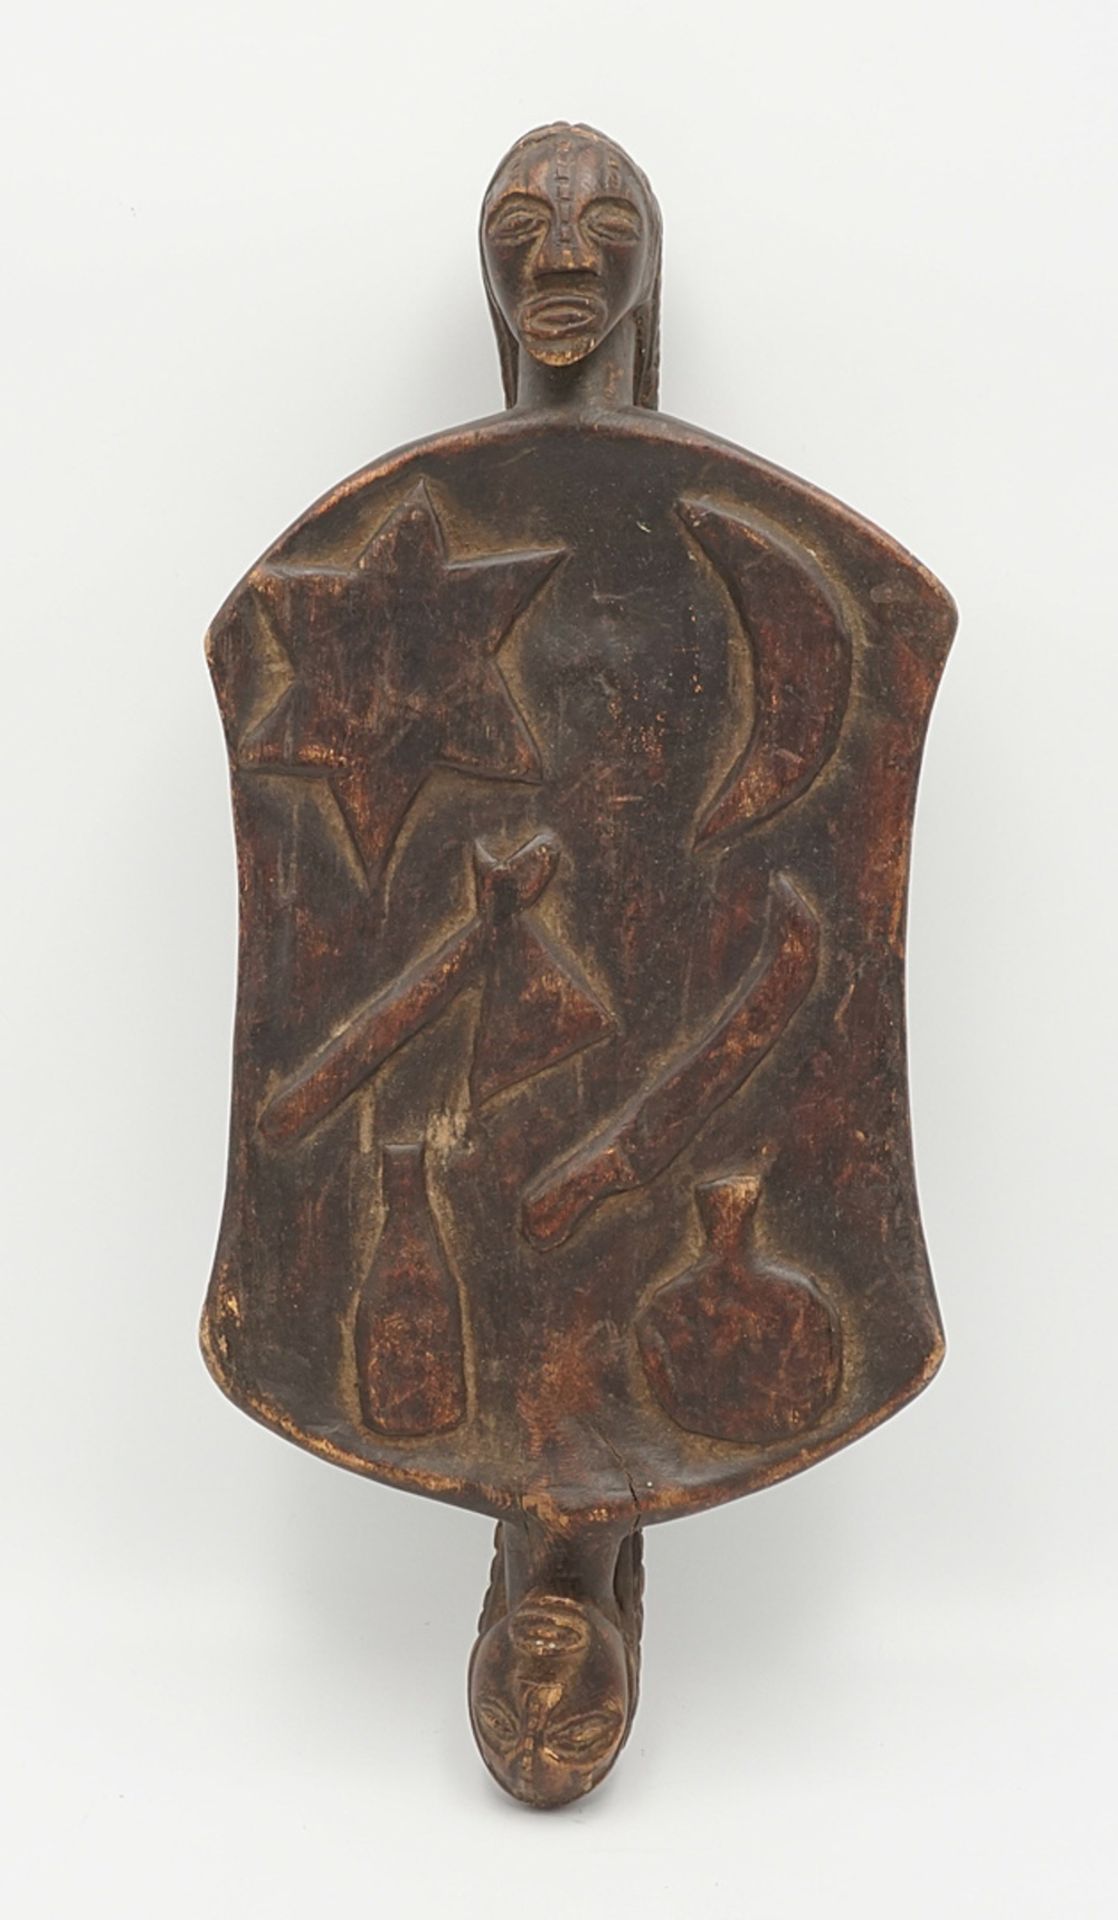 Ornamental tray with handles carved as heads, Africa - Image 4 of 5